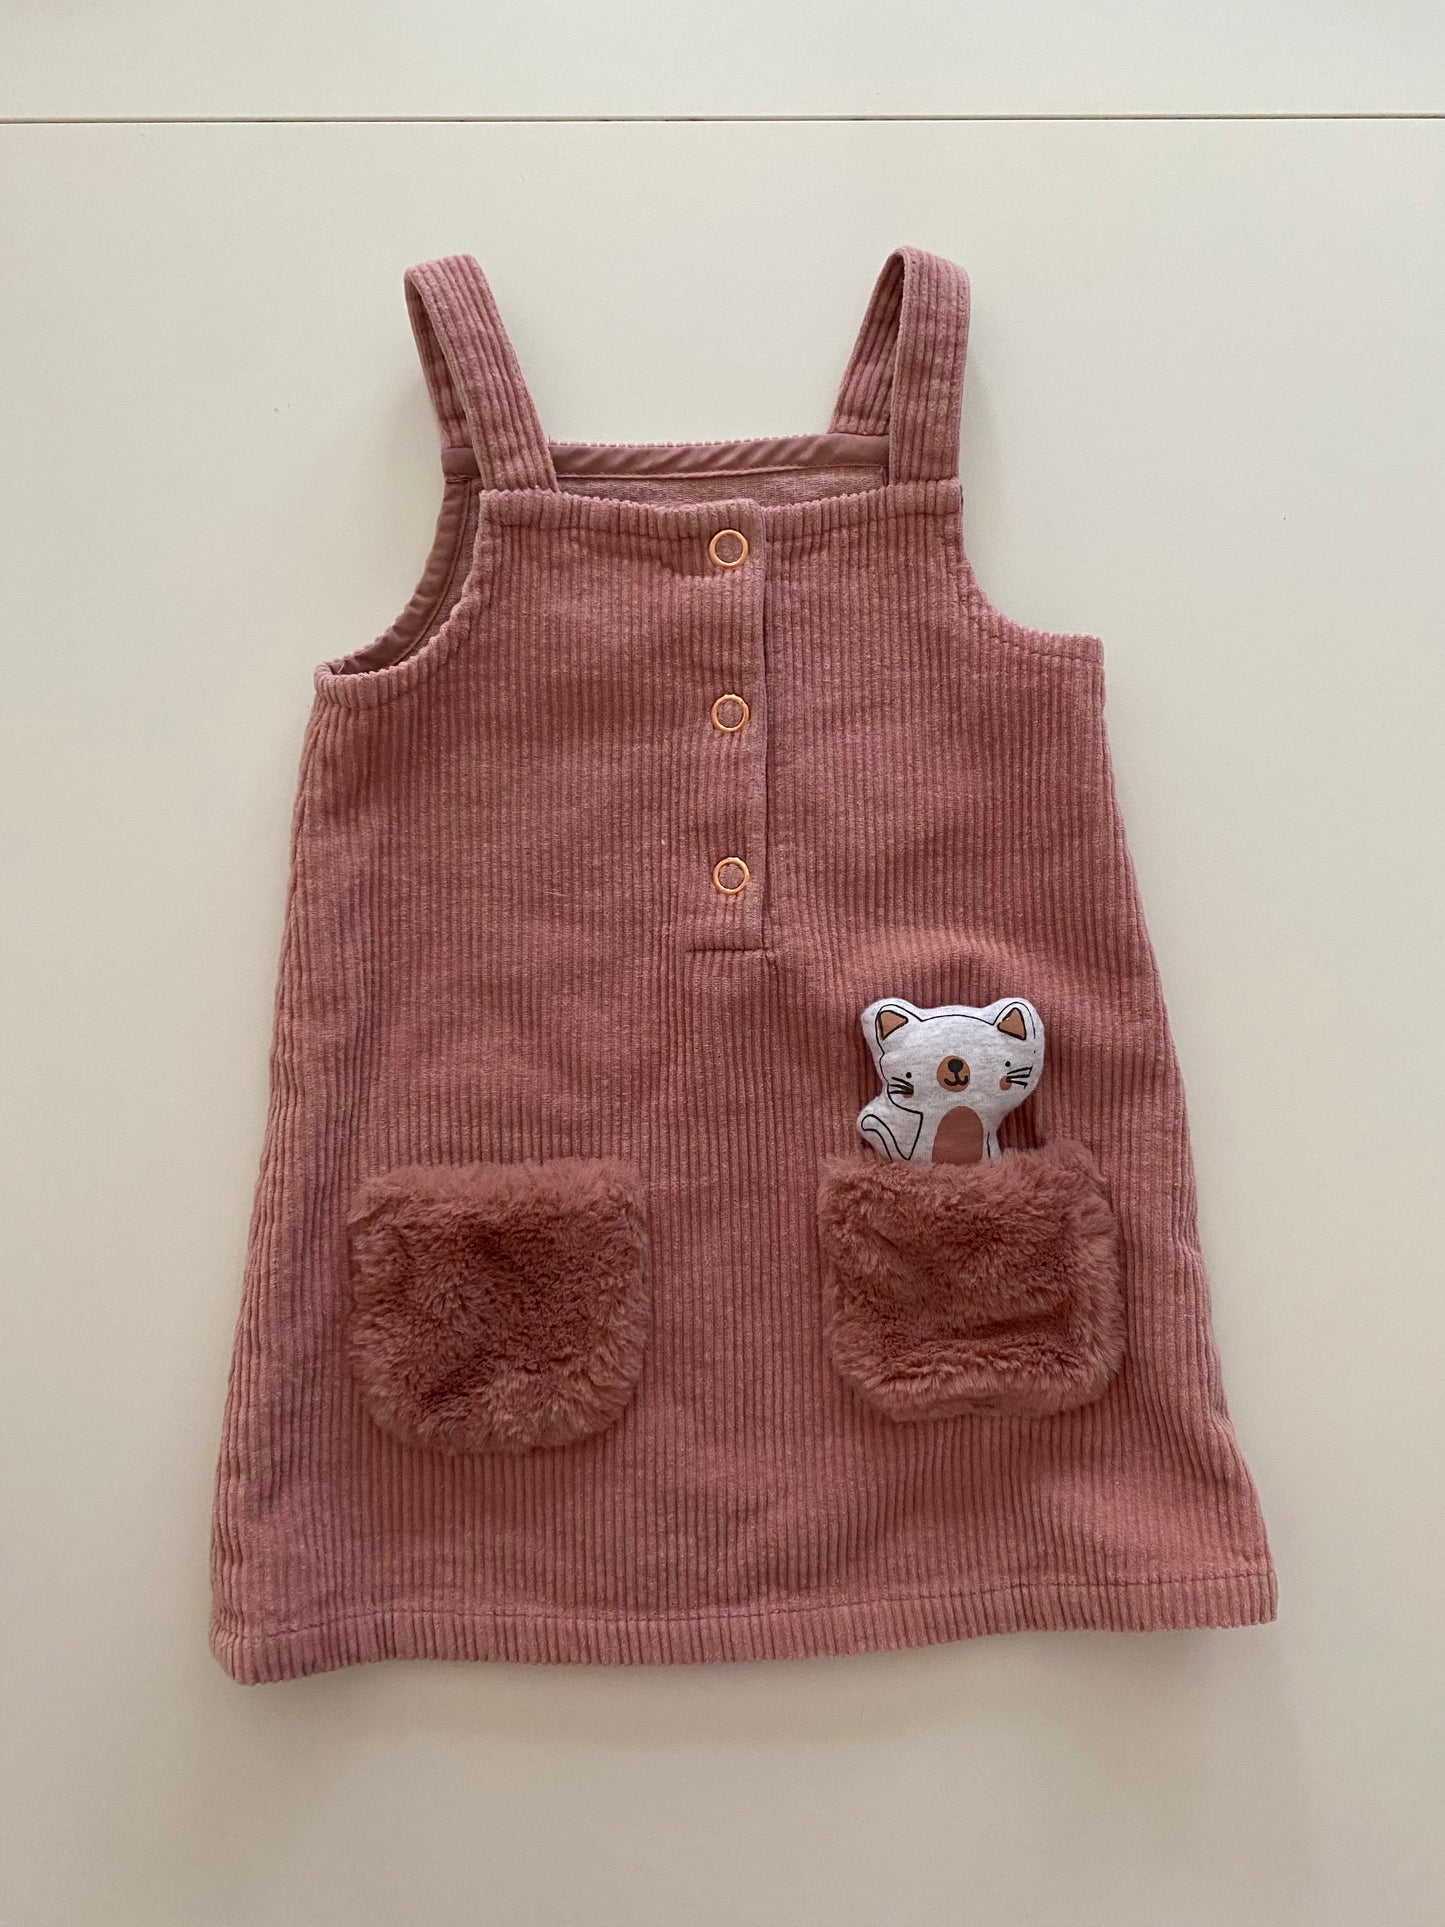 H&M Blush Pink Corduroy Overall Dress with Fuzzy Pockets Girls 12-18M